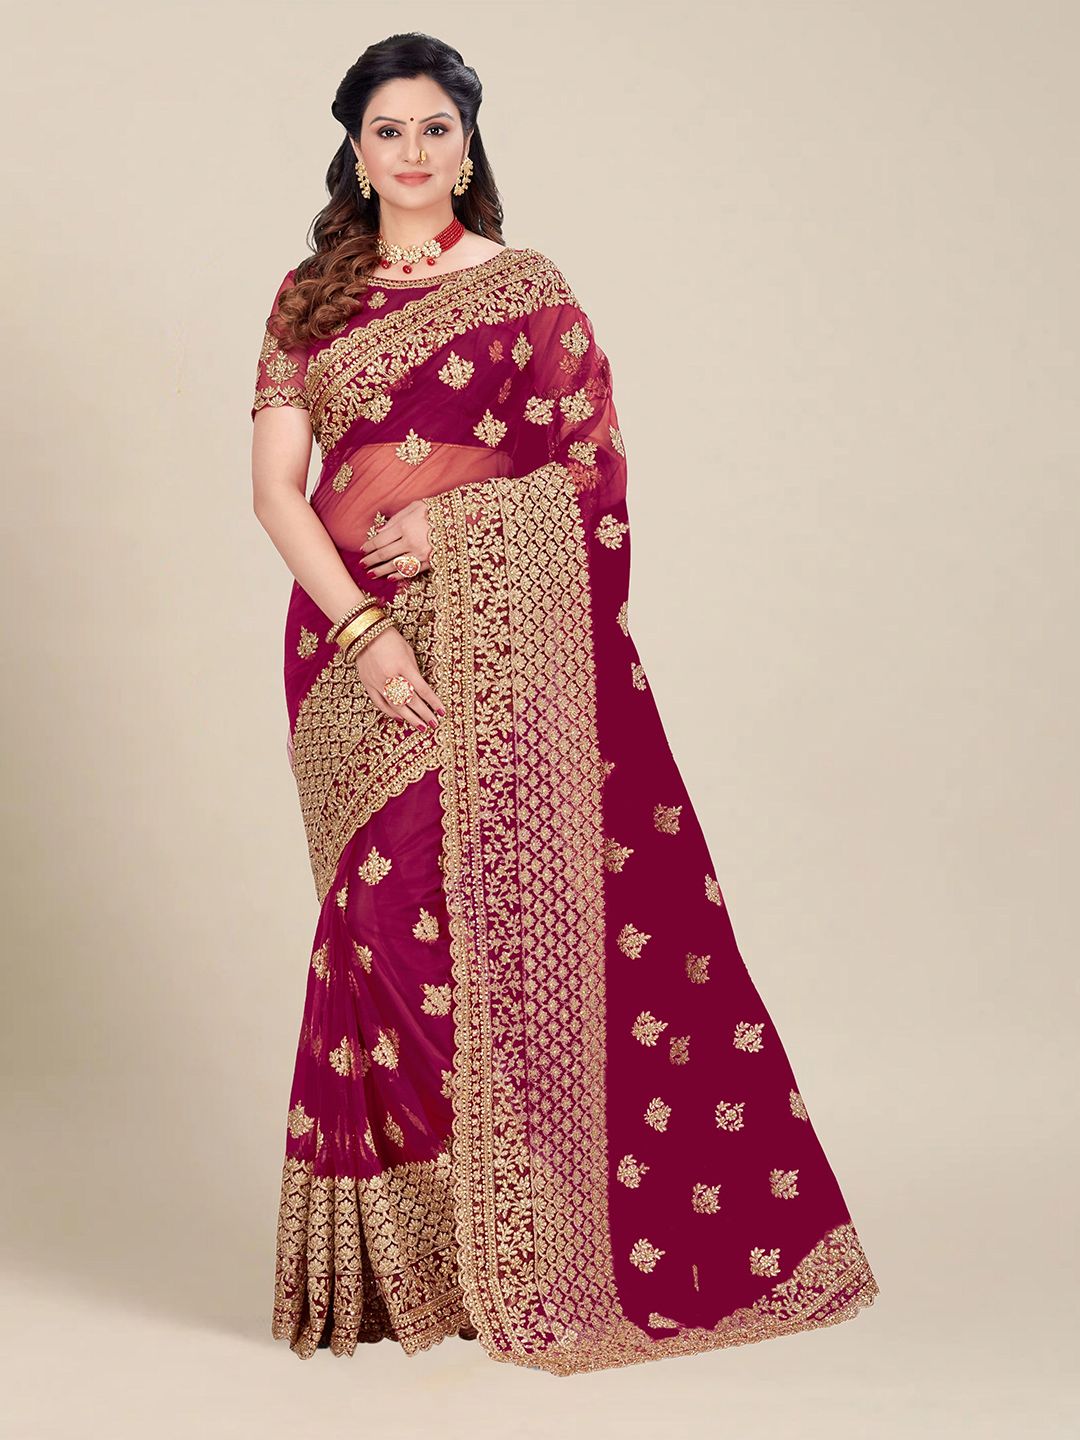 MS RETAIL Pink & Gold-Toned Floral Embroidered Net Heavy Work Saree Price in India